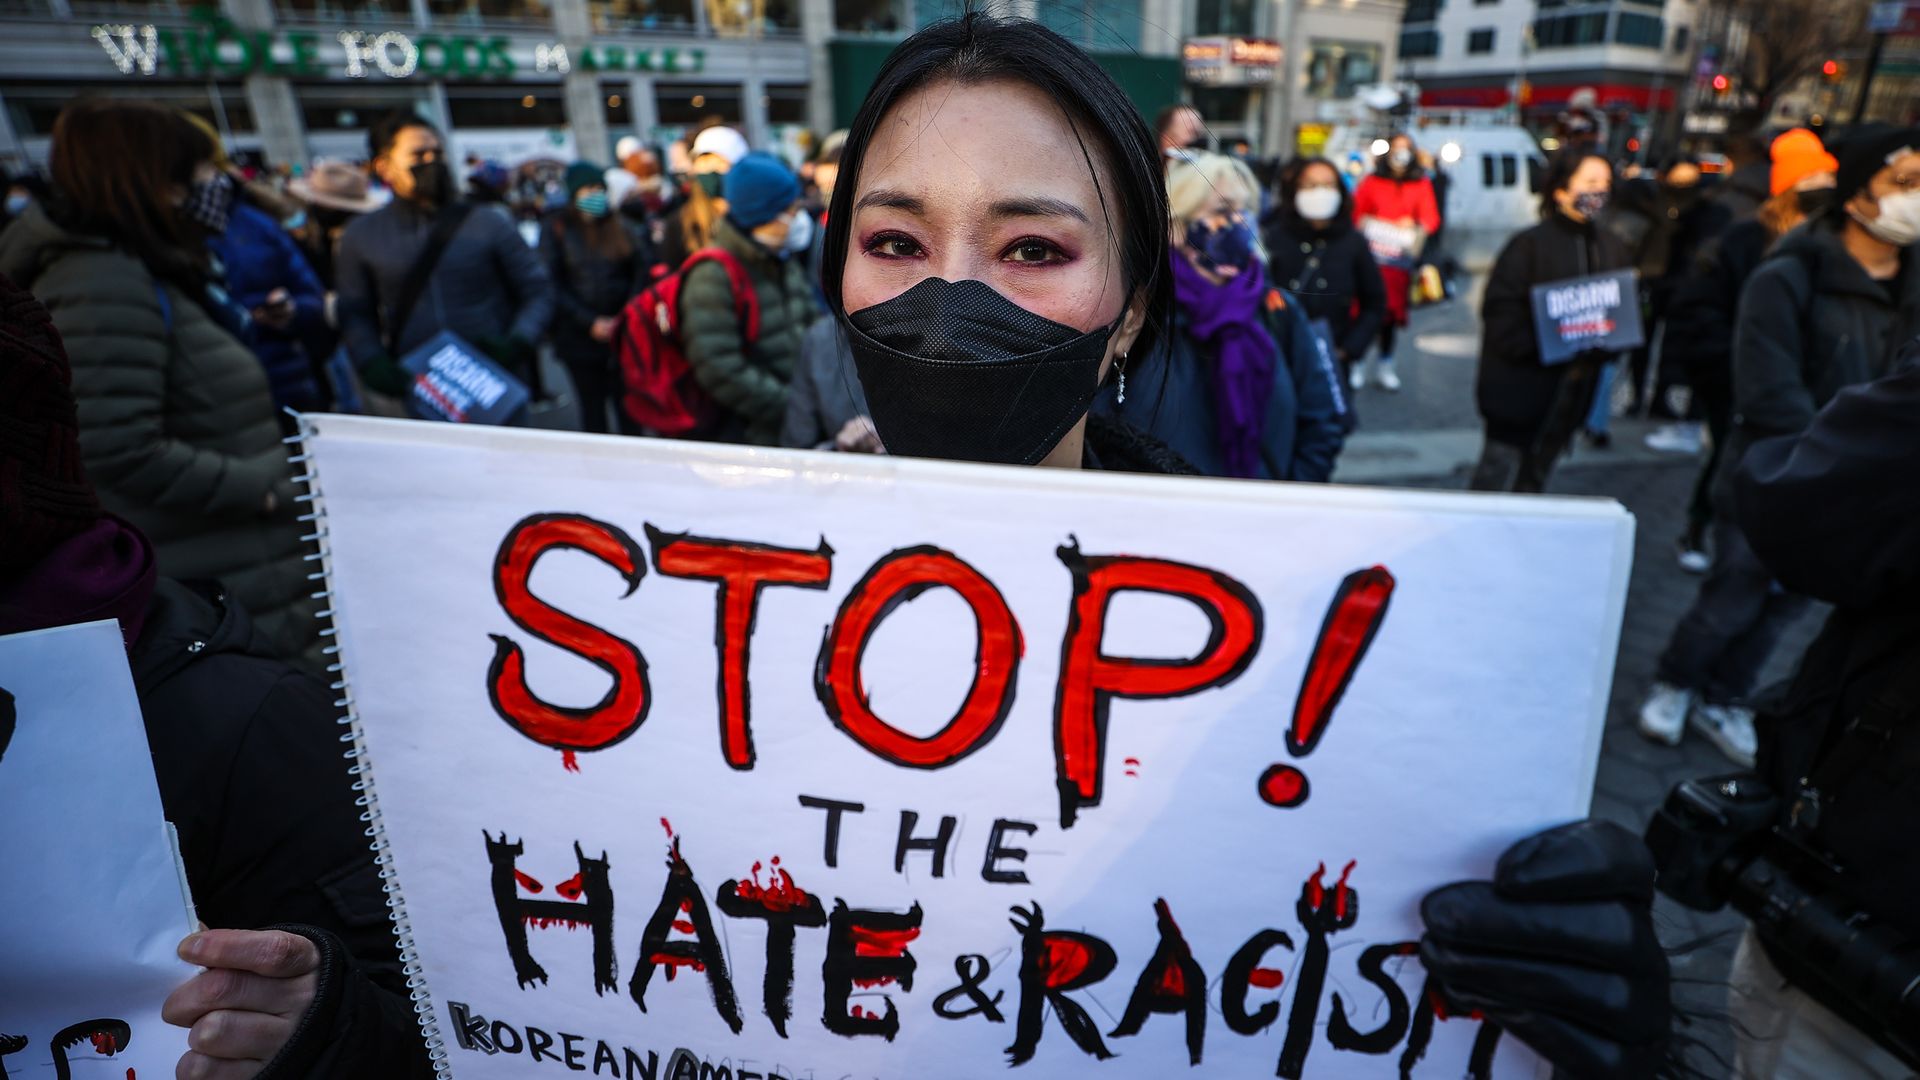 Picture of a woman holding a sign that says, "STOP the HATE & RACISM"